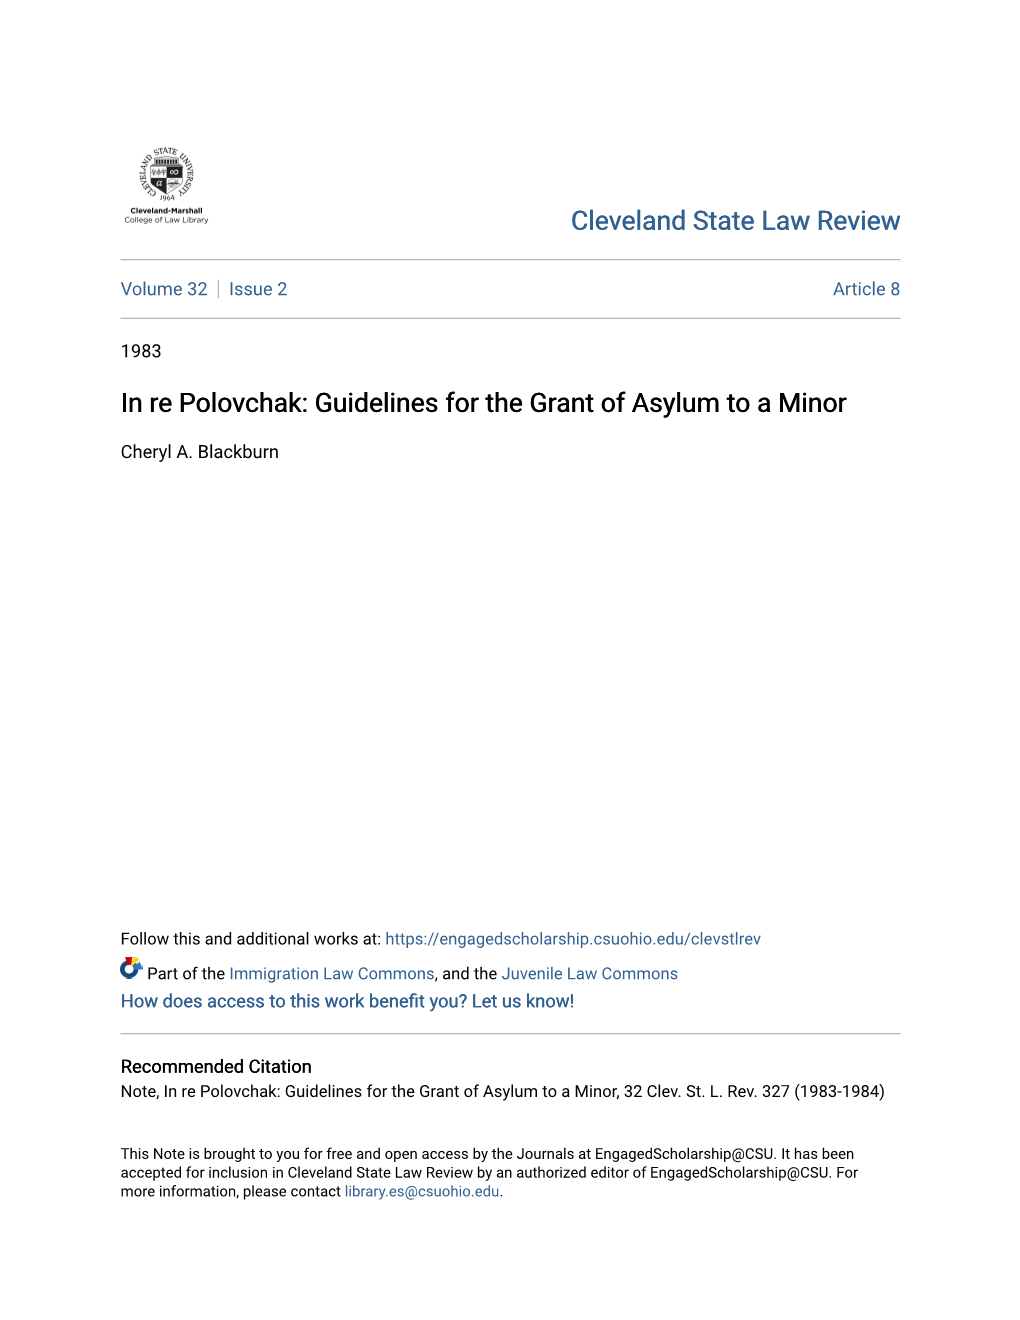 In Re Polovchak: Guidelines for the Grant of Asylum to a Minor